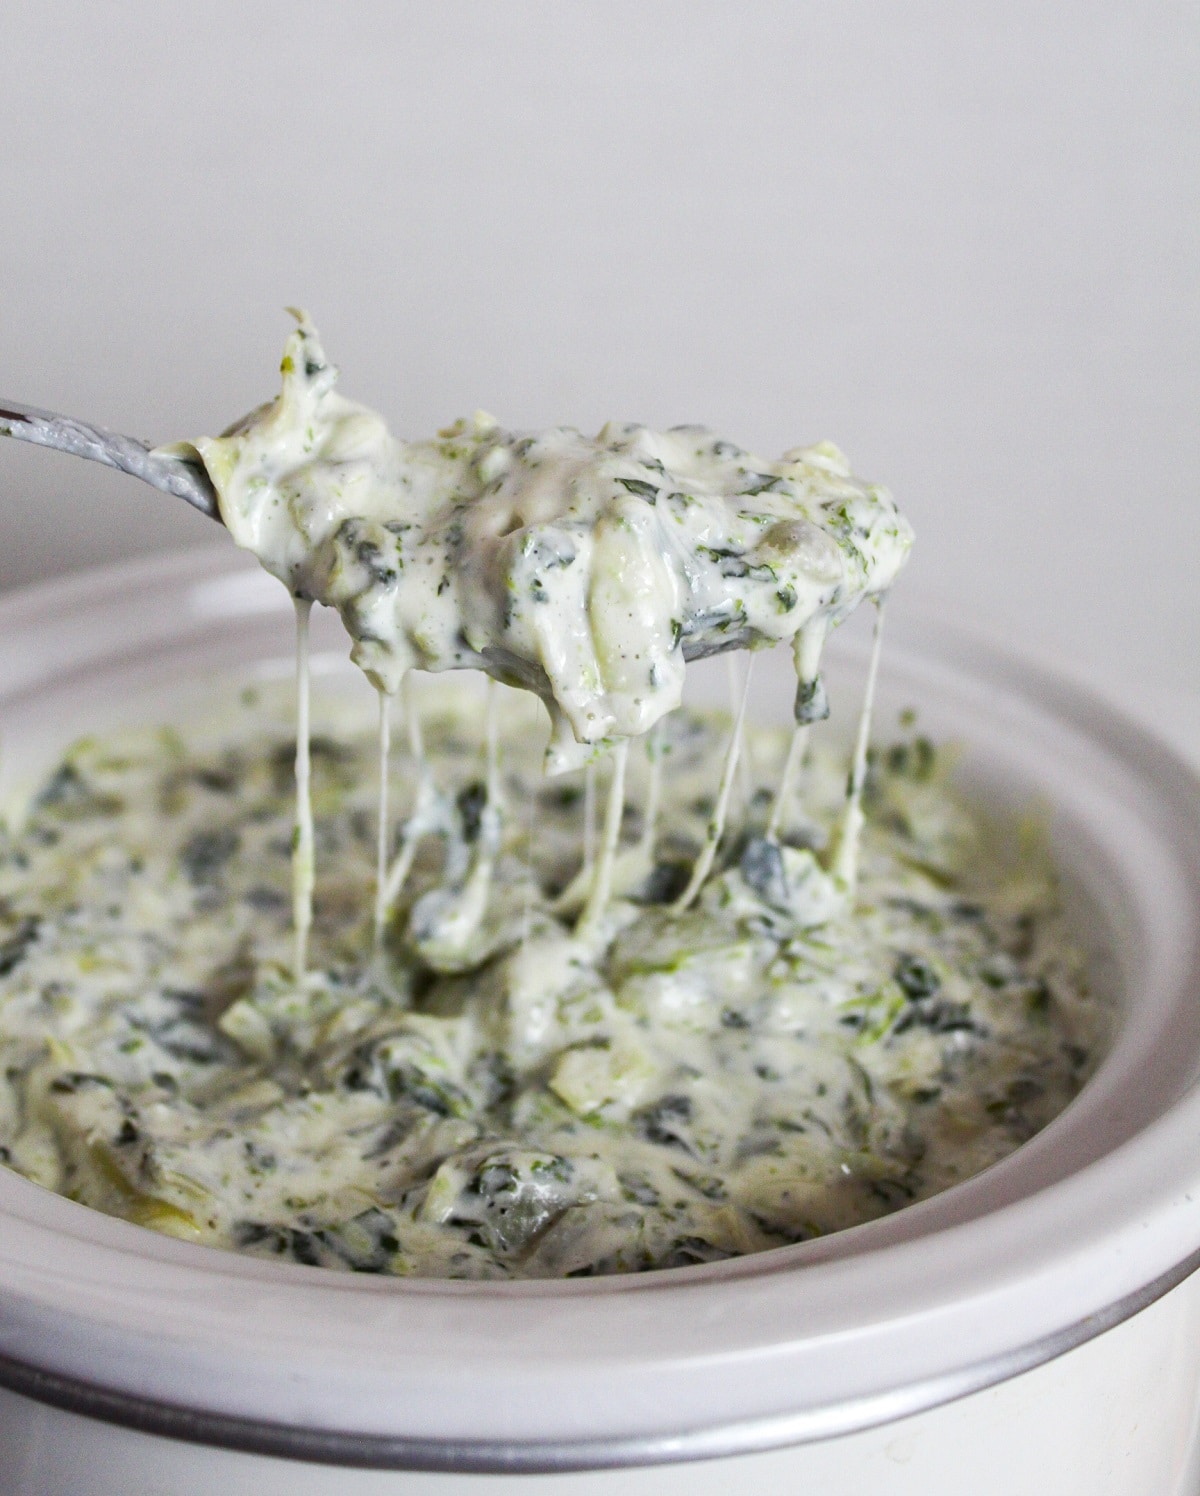 spinach and artichoke dip on a spoon